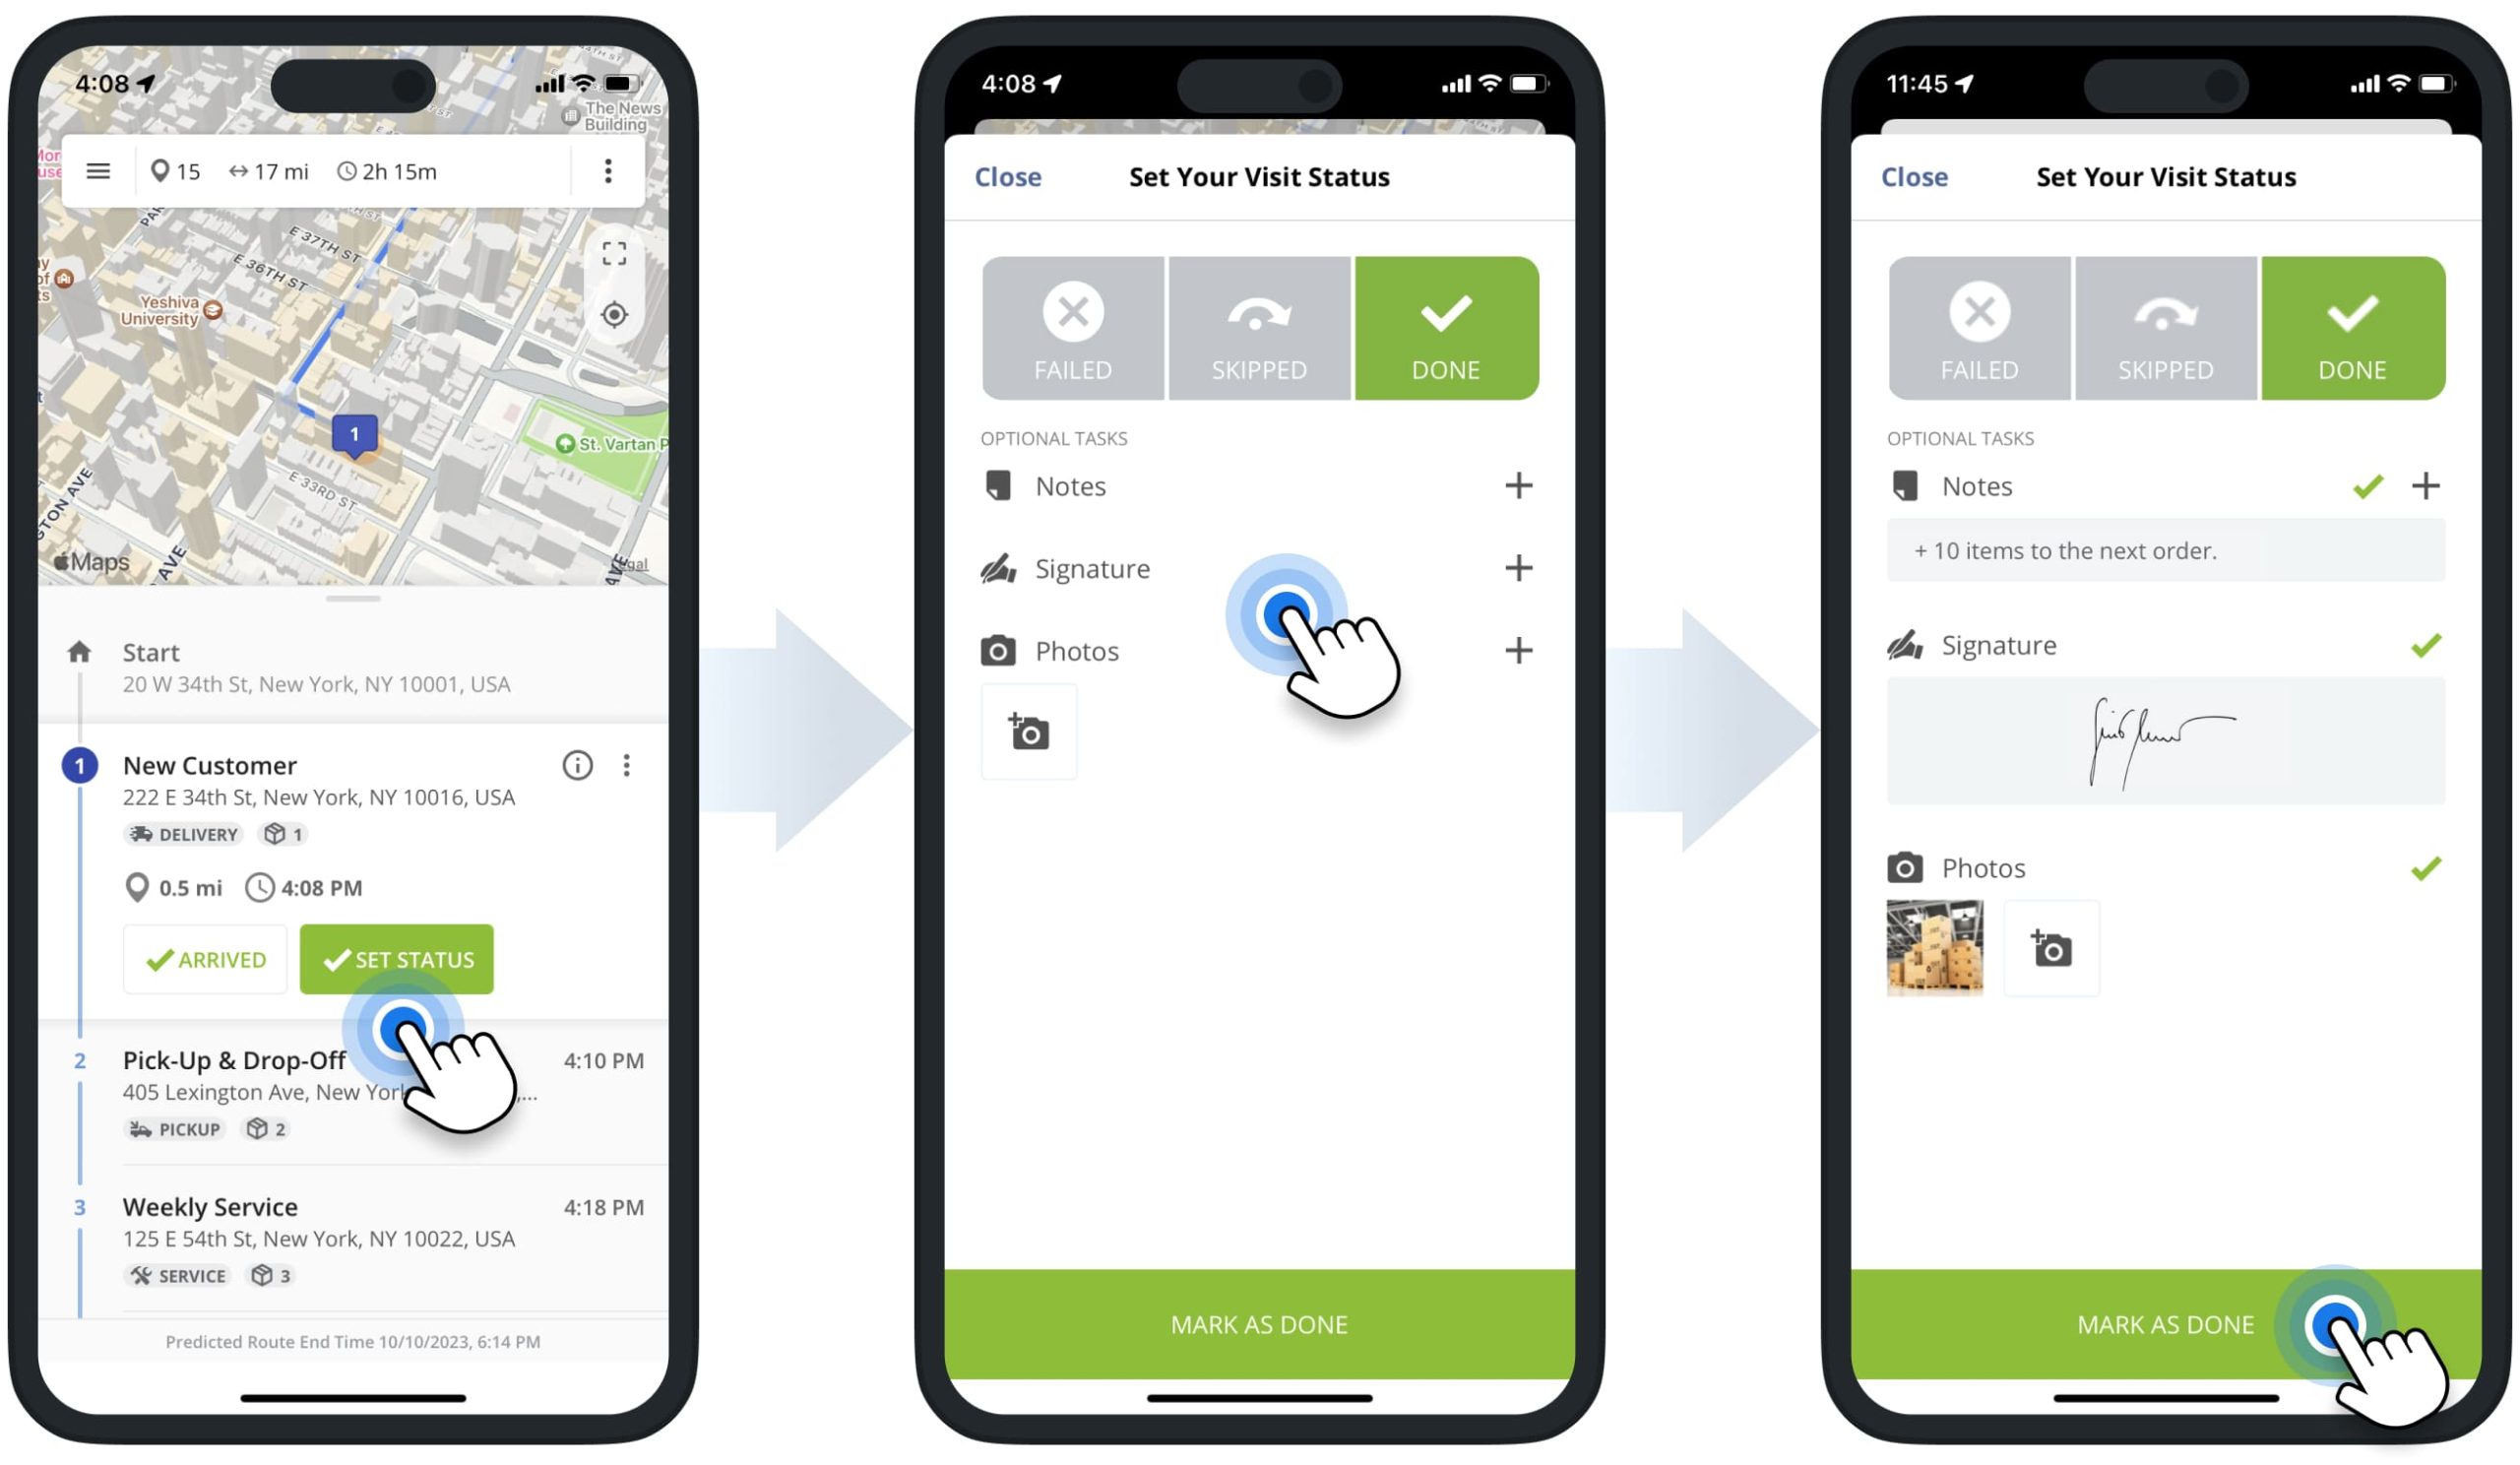 Attaching such proof of visit, delivery, or service to route stops as electronic signatures, photos, and text notes on the iPhone Route Planner app.